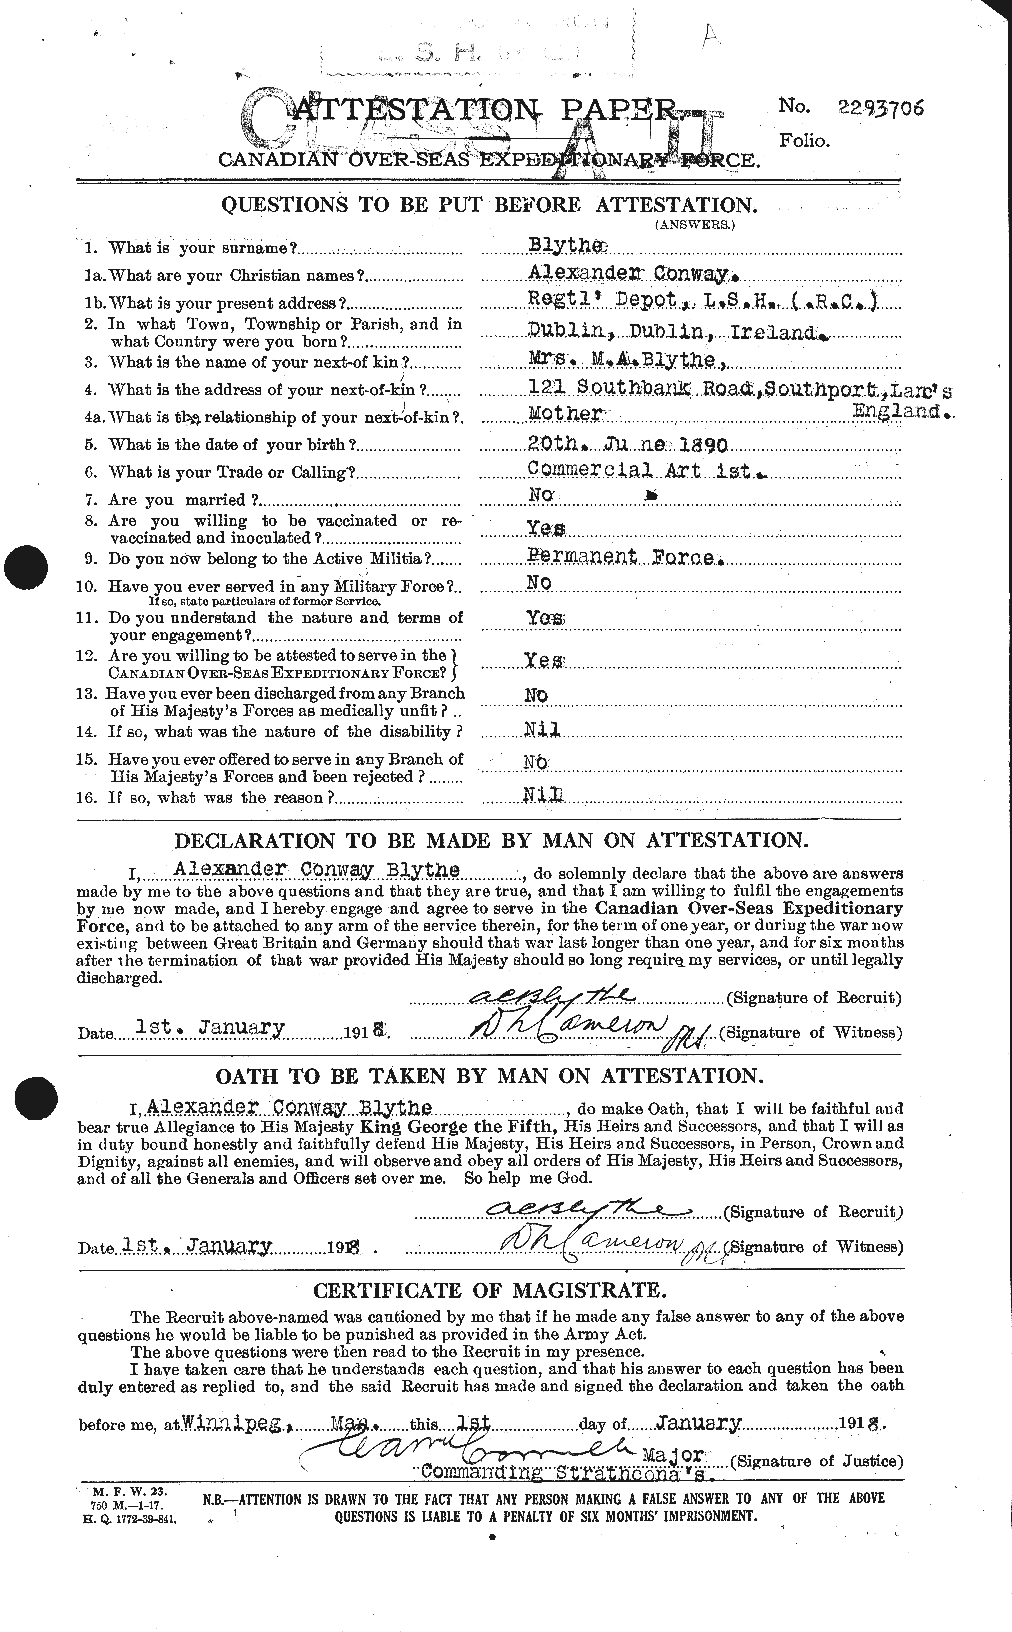 Personnel Records of the First World War - CEF 249107a